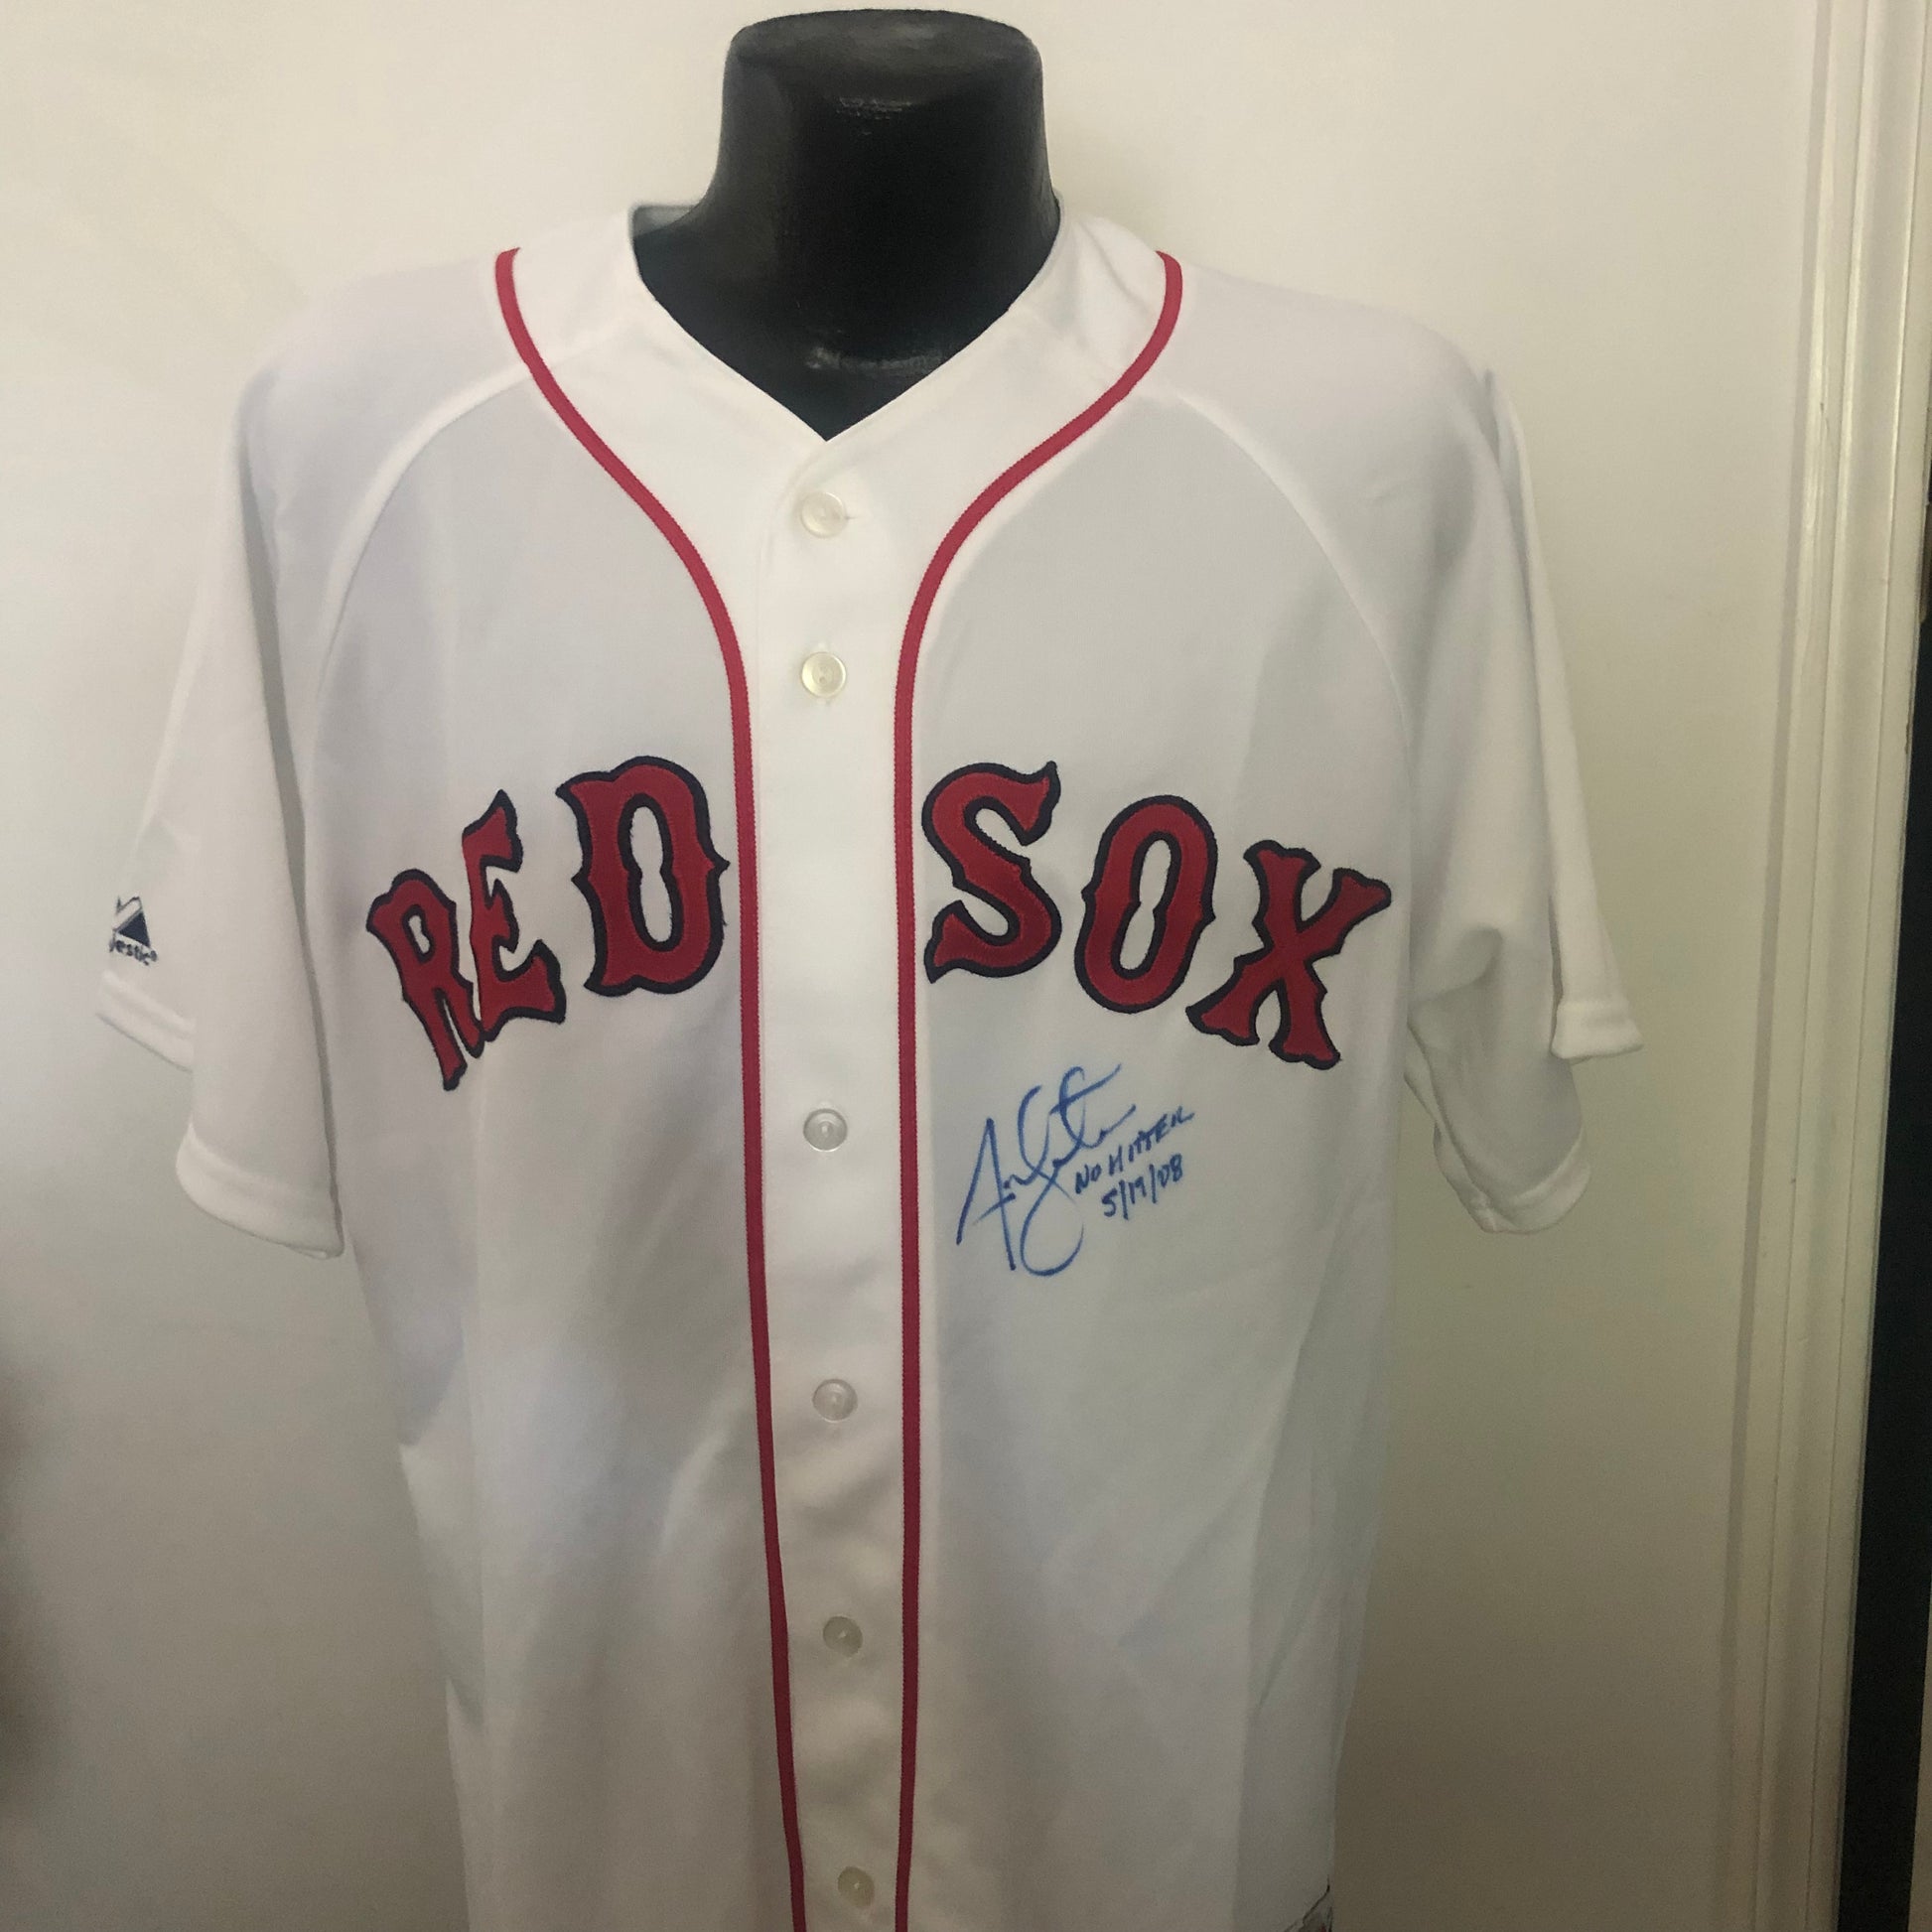 Pgacollectibles Red Sox Jon Lester Signed Authentic Jersey with No Hitter Inscription and MLB Cert